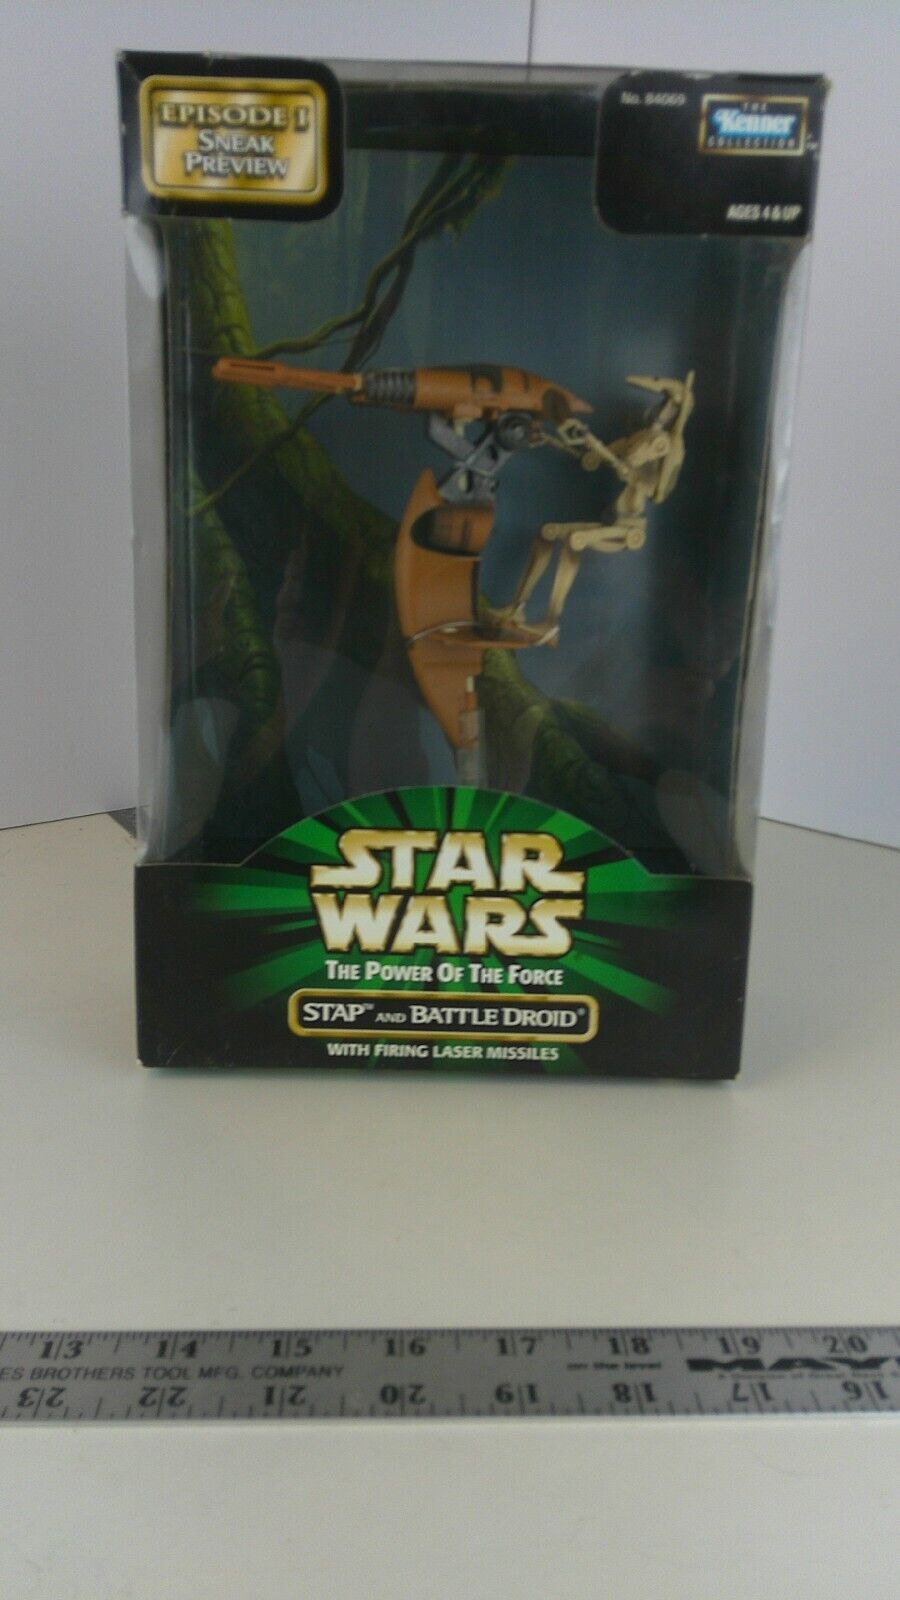 1998 Hasbro Star Wars Power of the Force STAP and Battle Droid MISB  BIS